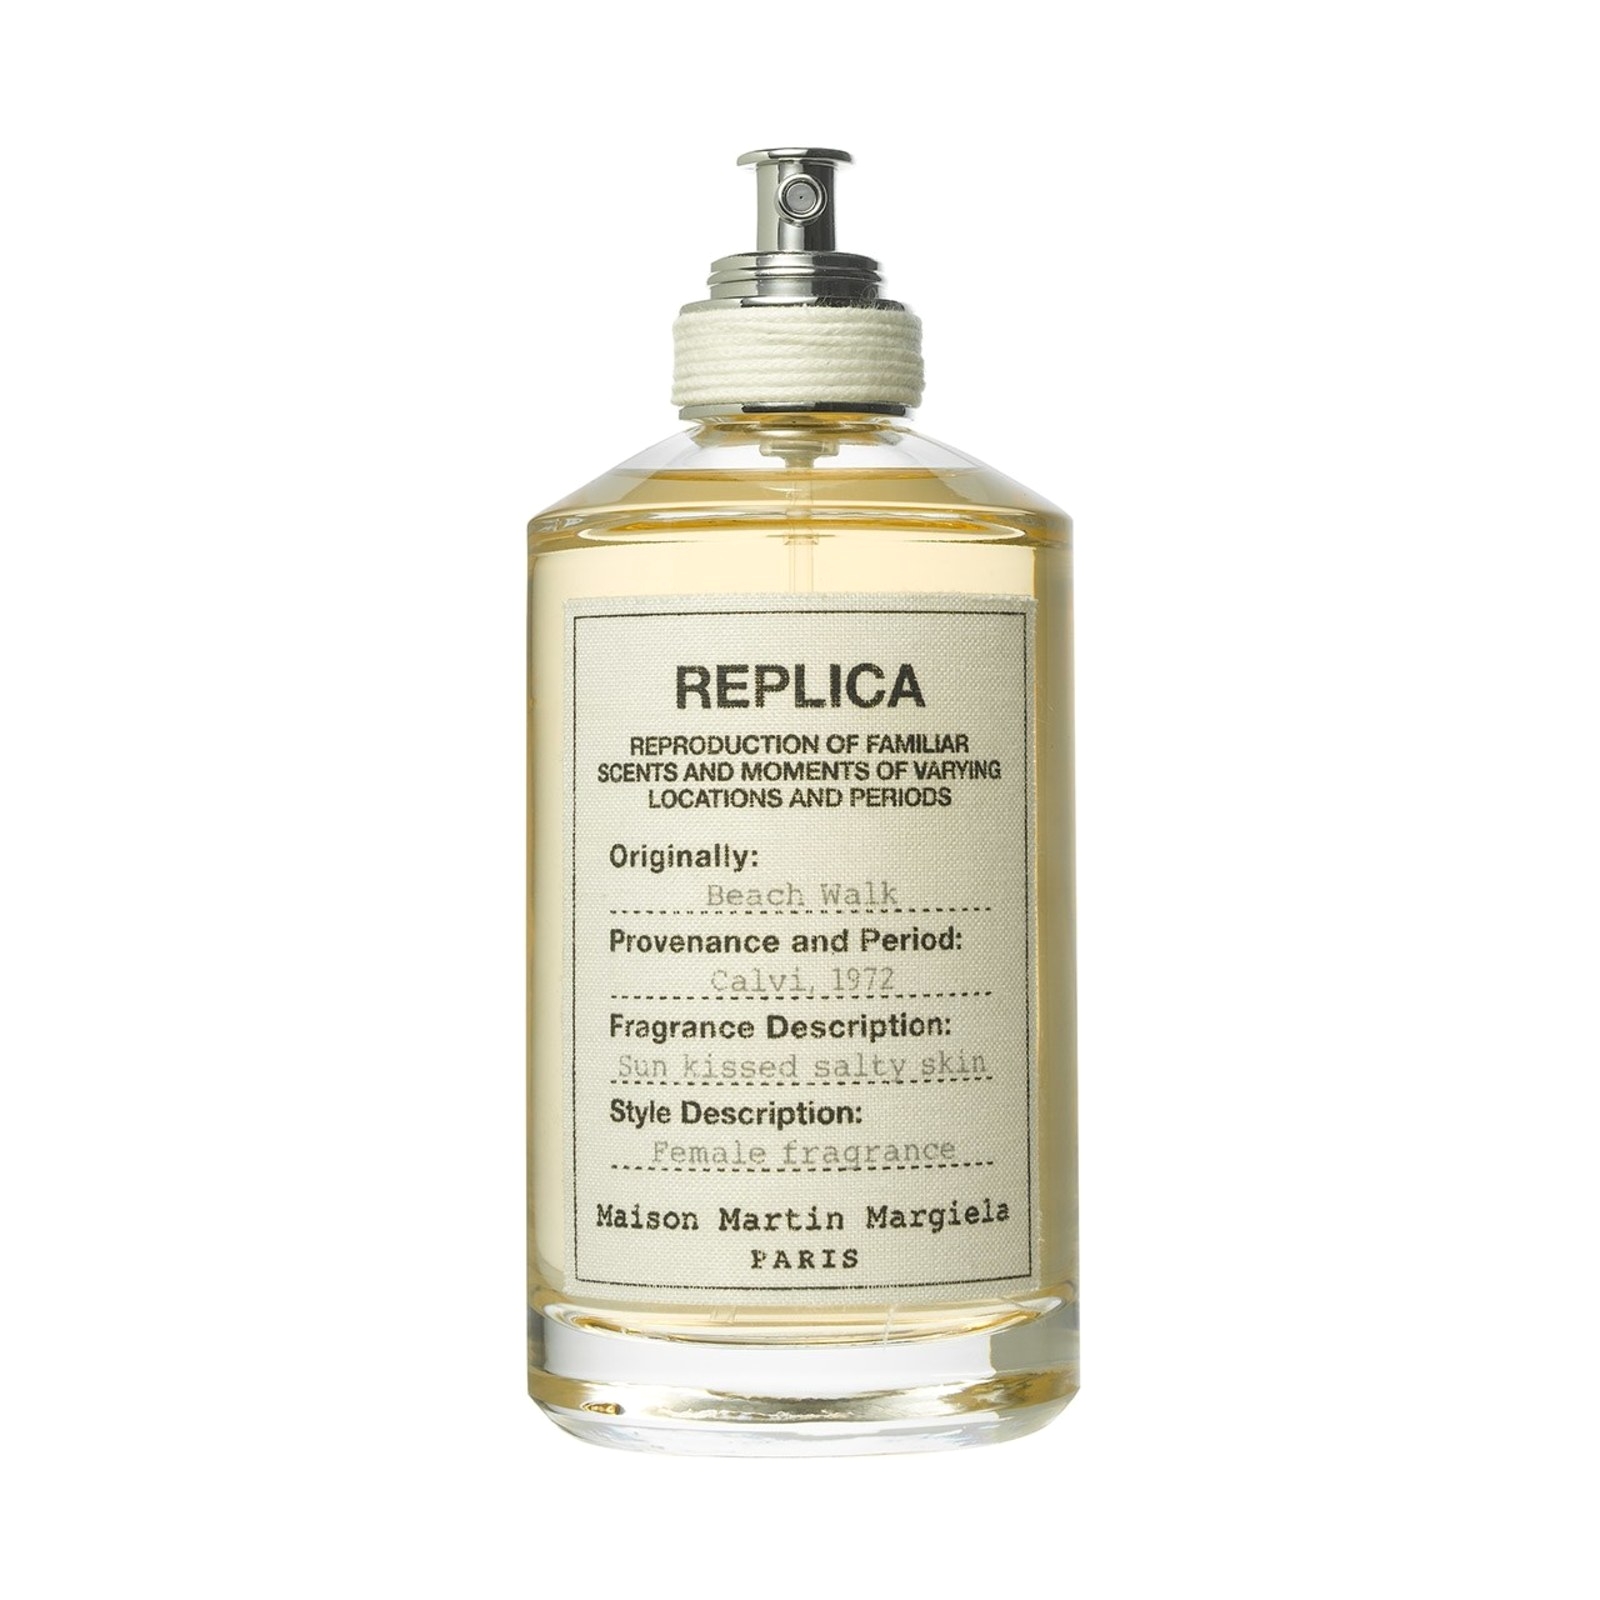 desperate for a mental escape maison margiela bottled all the best bits of a day at